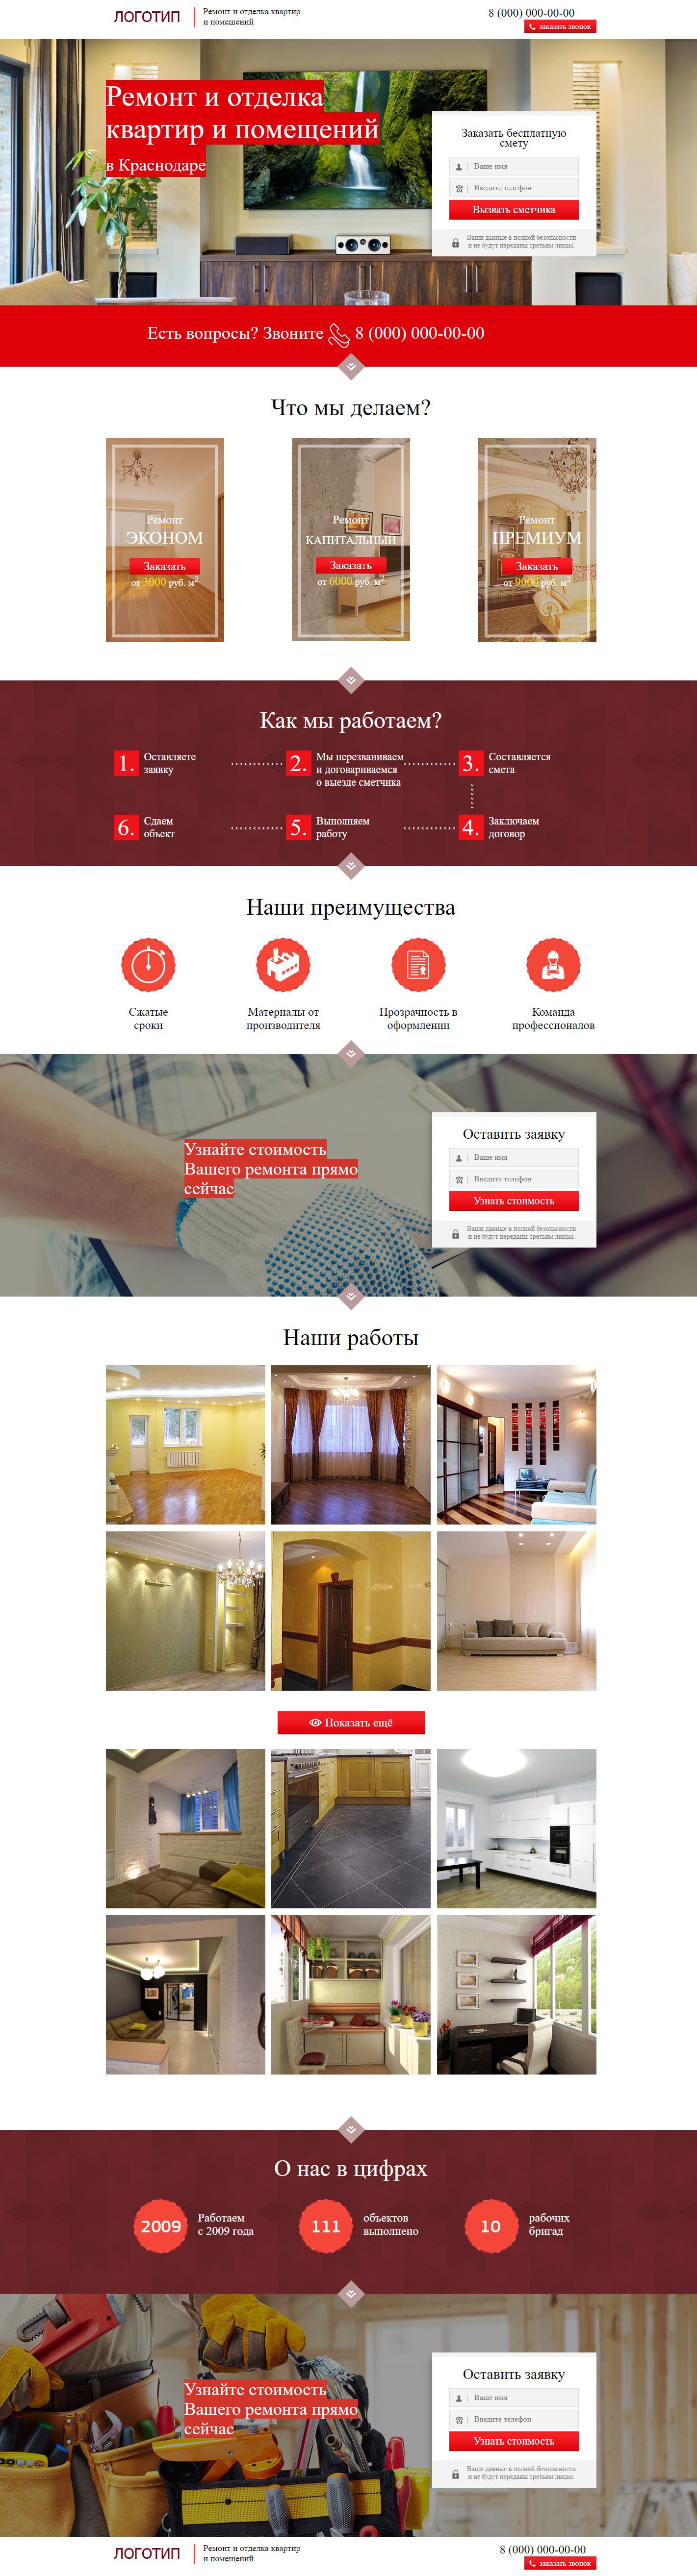 Landing page - Overhaul of apartments